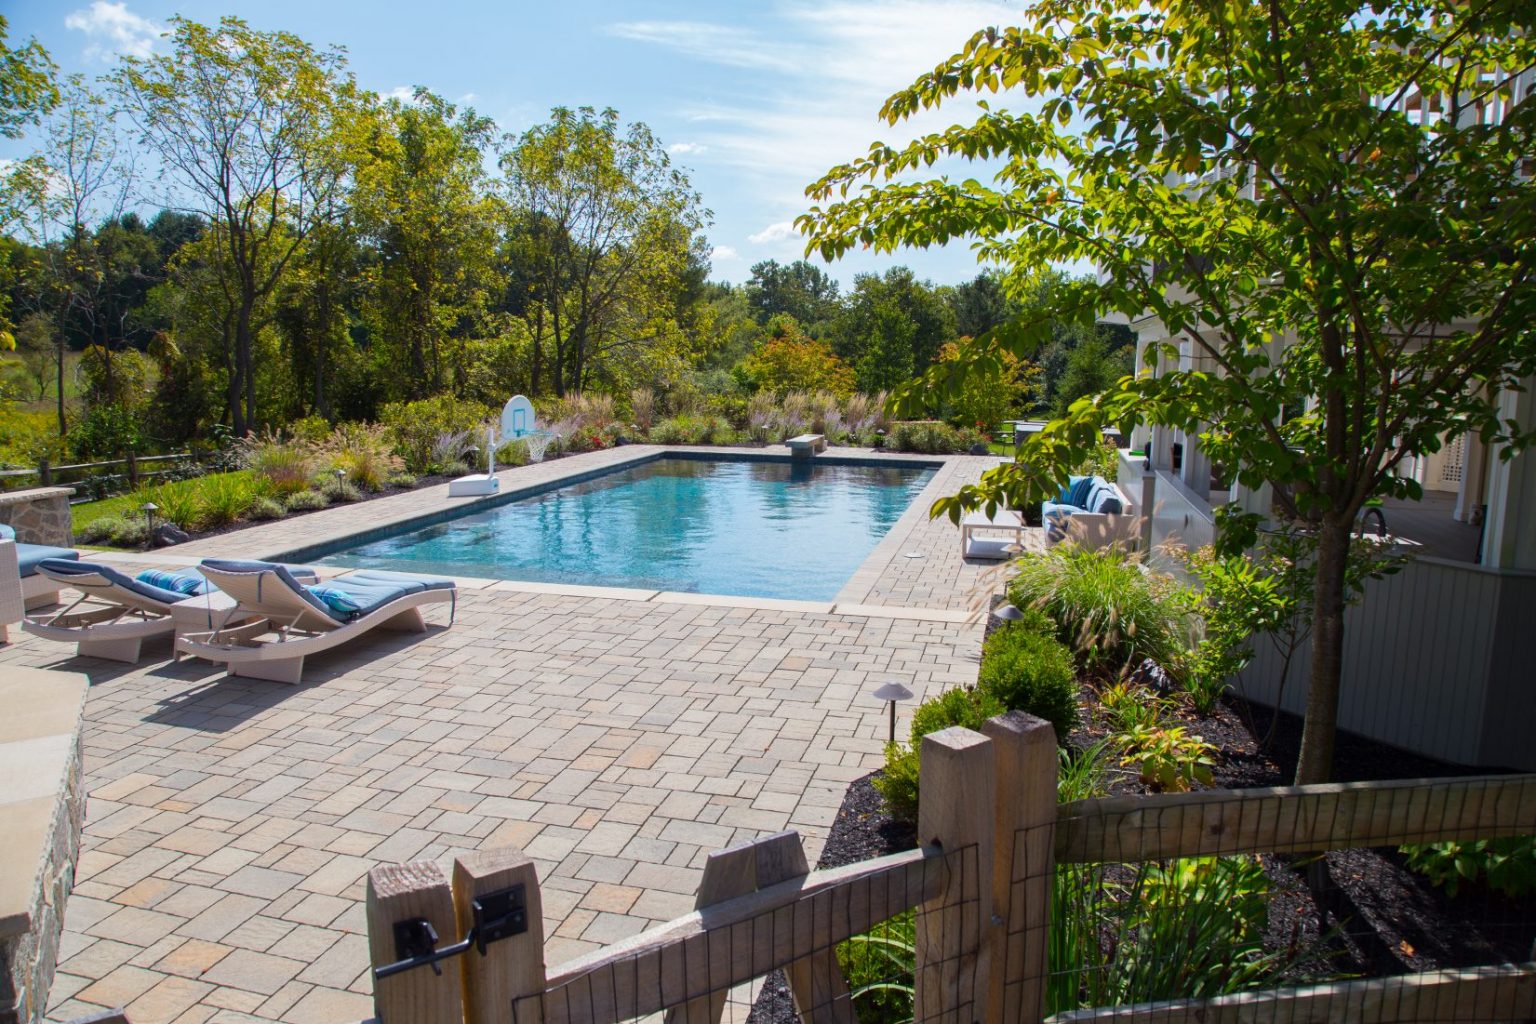 75 Questions for Planning Your New Pool